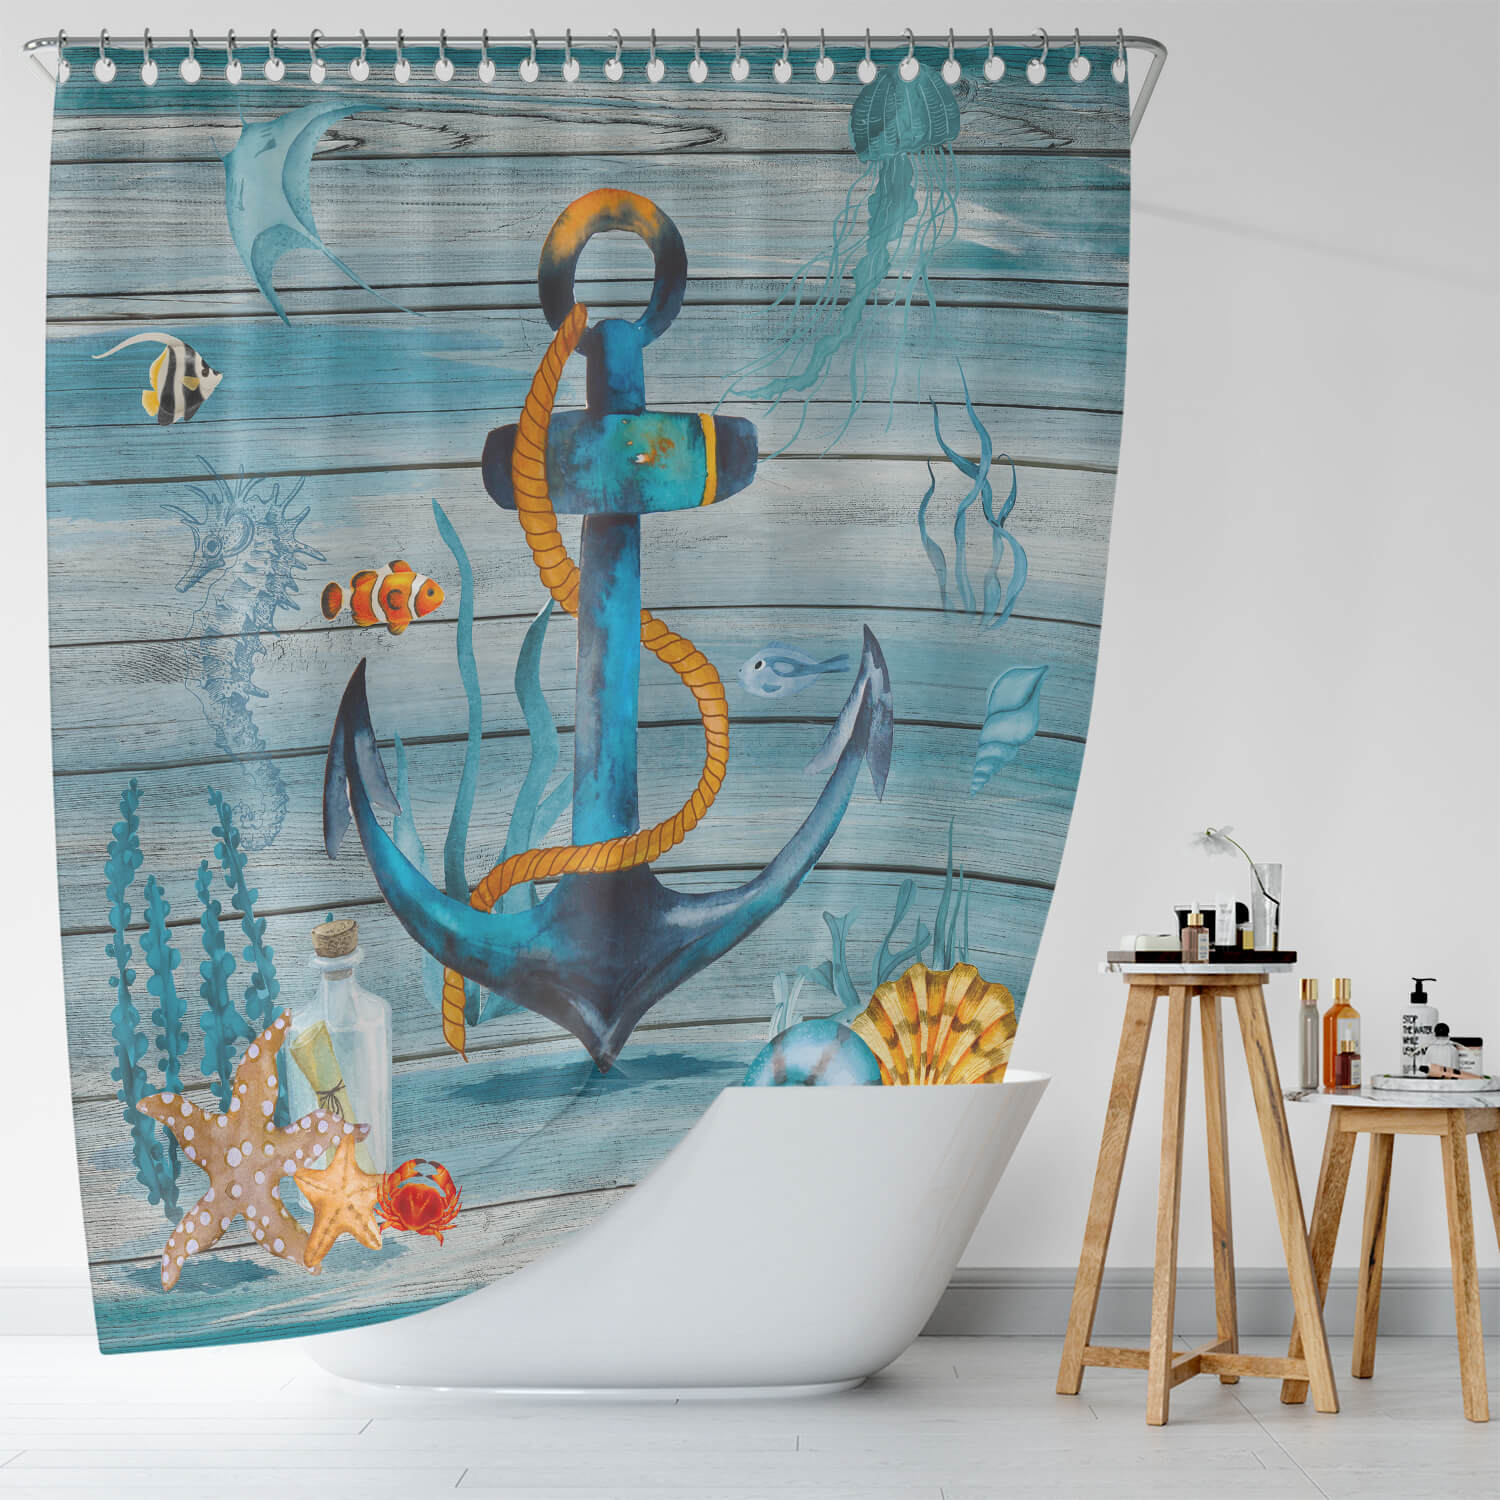 A Coastal Anchor Shower Curtain made by Cotton Cat, with a blue anchor design, and made of waterproof polyester.